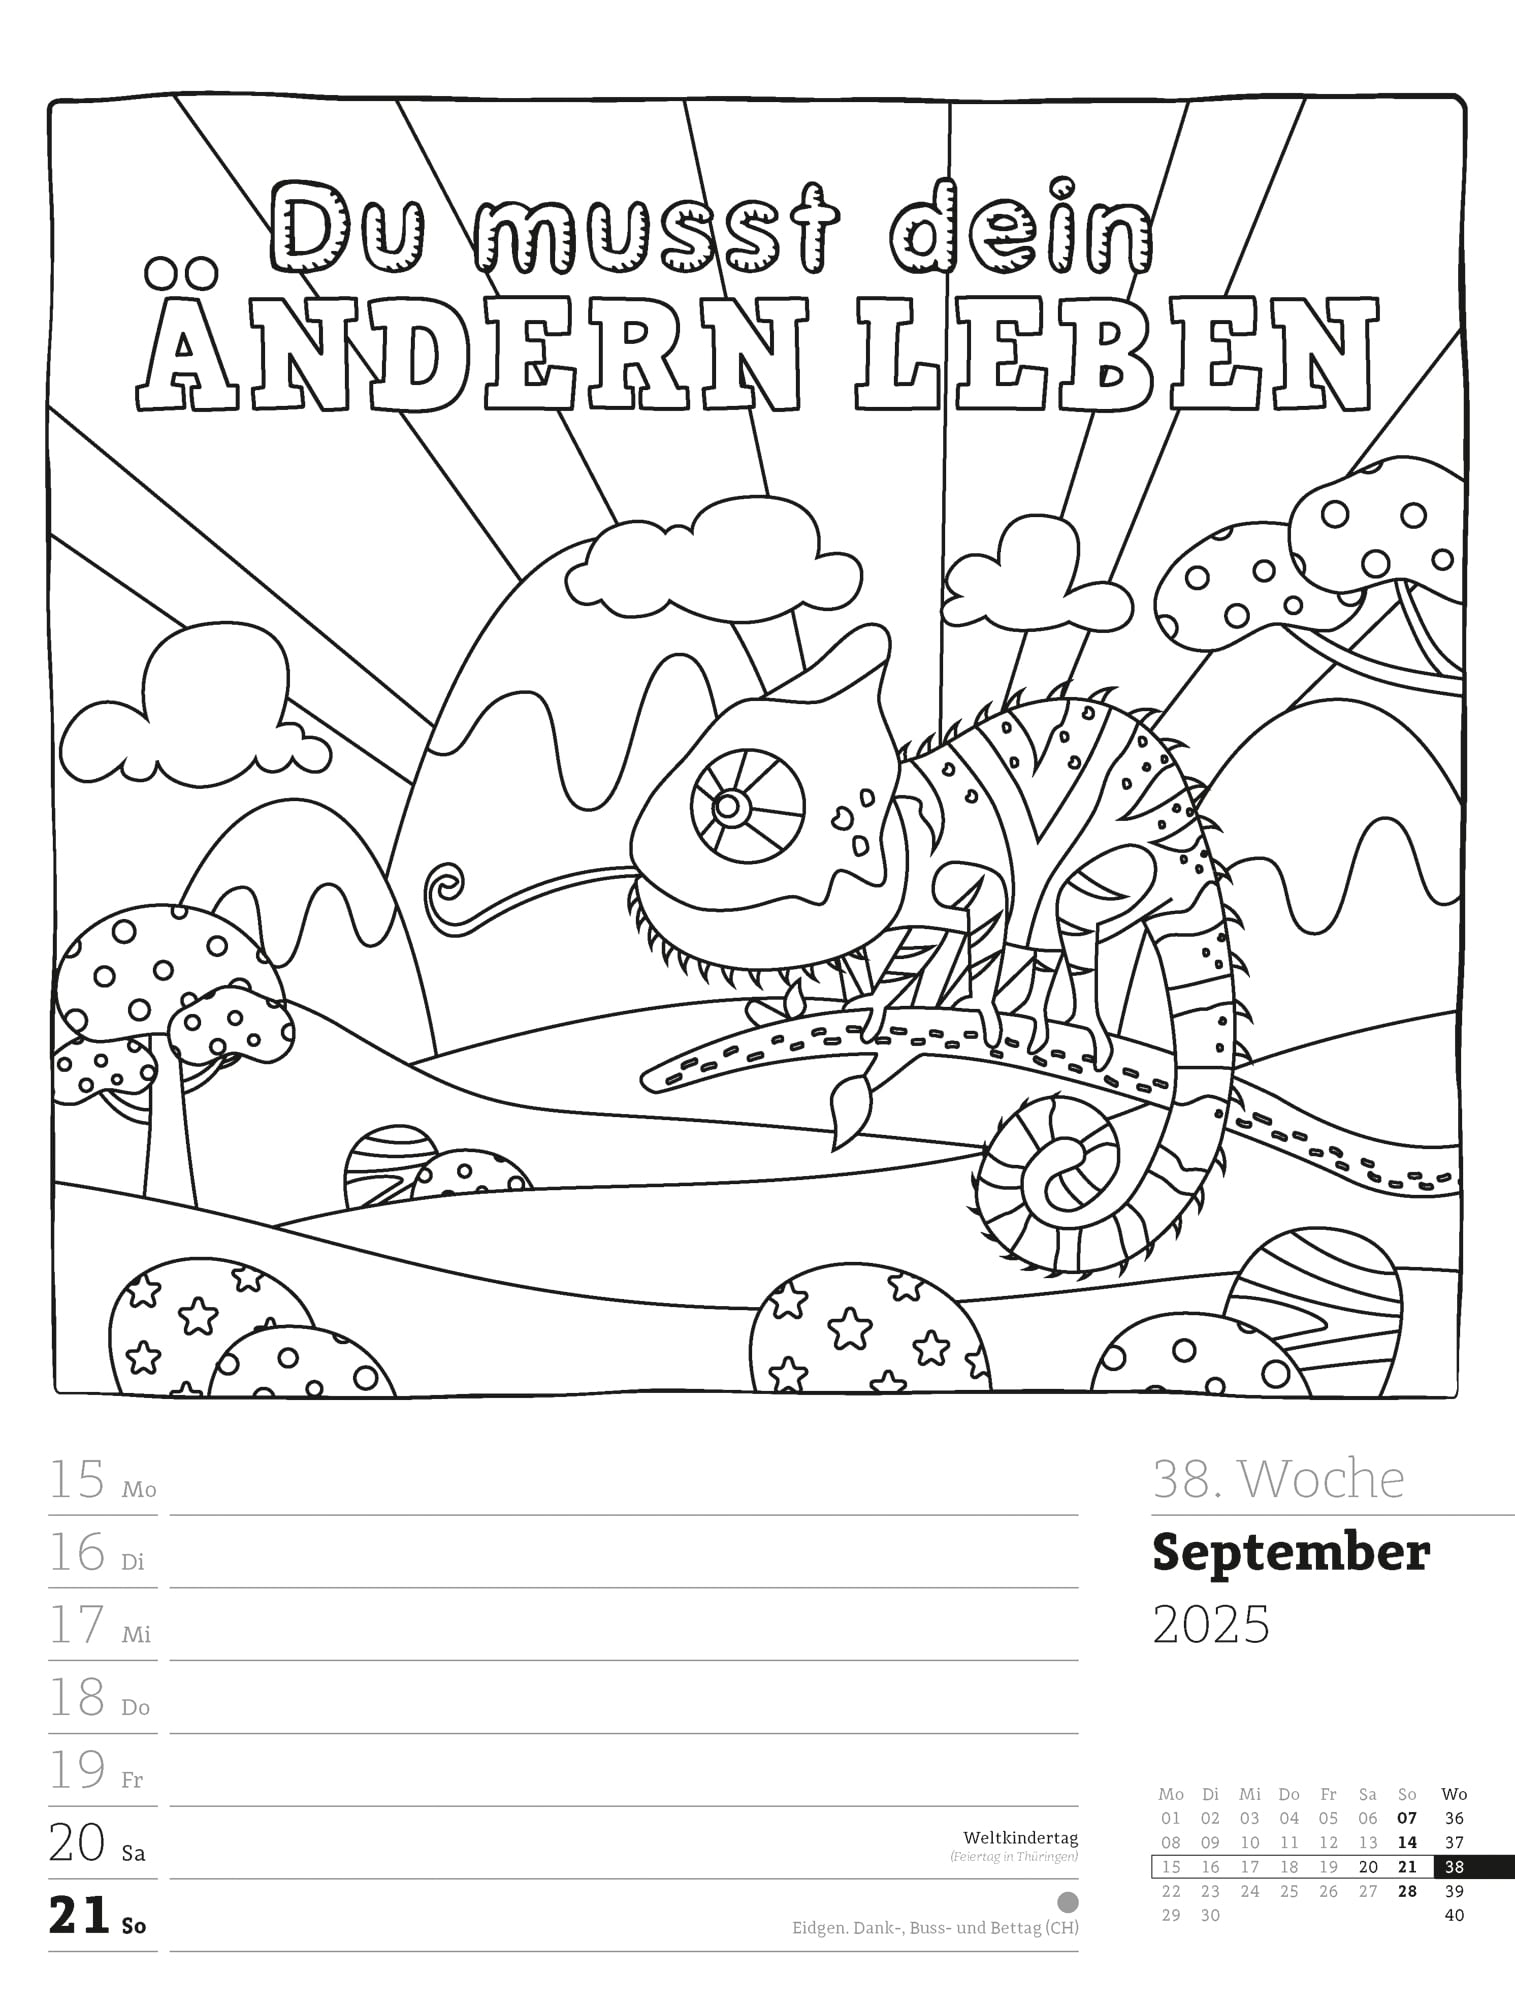 Ackermann Calendar Funny Quotes 2025 - Weekly Planner - Inside View 41